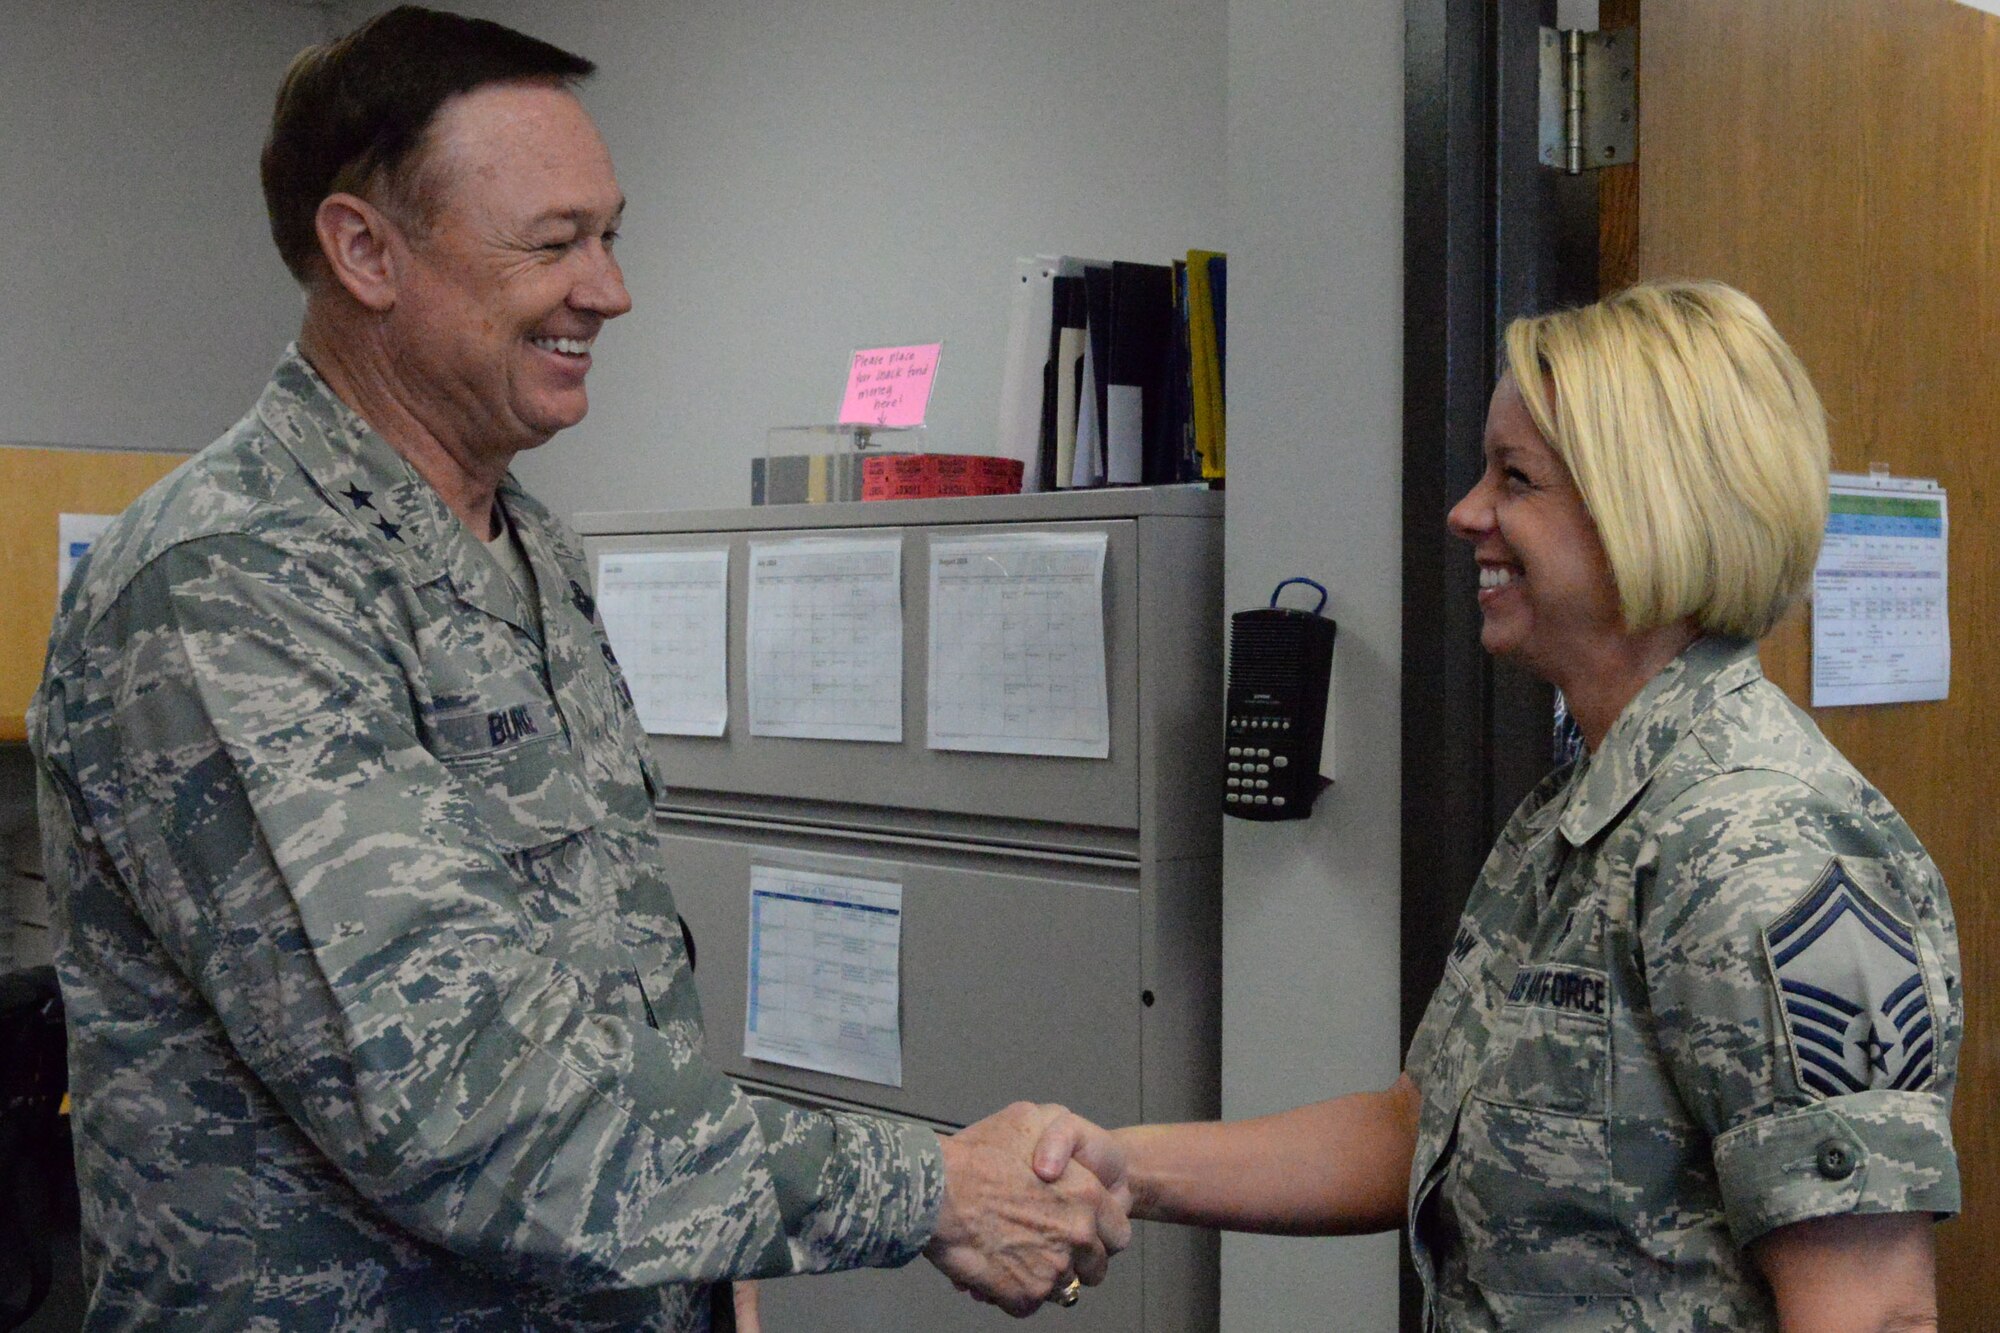 Air Force District of Washington Commander Maj. Gen. Darryl Burke presents a coin to Senior Master Sgt. Jennifer Klink in the dental clinic on Joint Base Anacostia-Bolling, Washington D.C., June 9, 2016. Klink was recognized by Gen. Burke for her efforts in making 2015 AFDW Annual Awards banquet a memorable event.